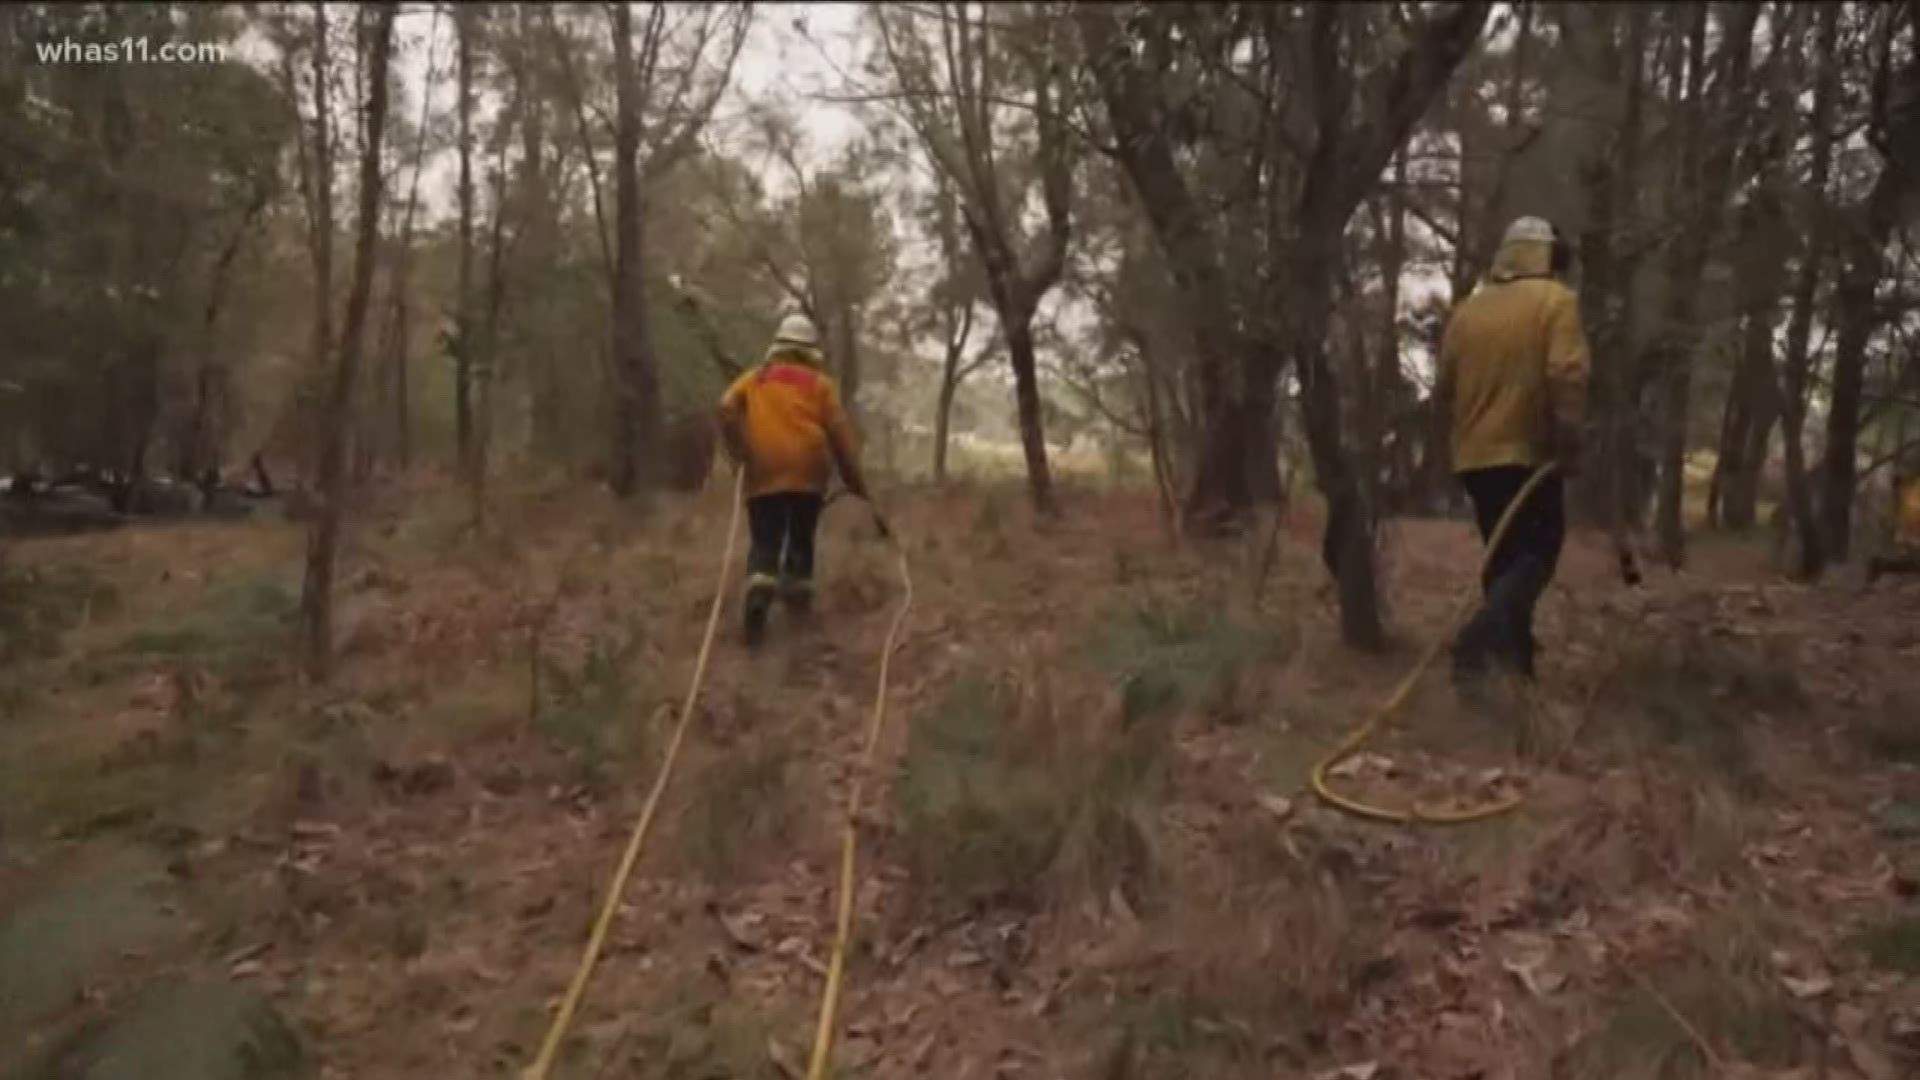 WHAS11's Abby Lutz got a local look at how she plans to help the Australian Wildfires.